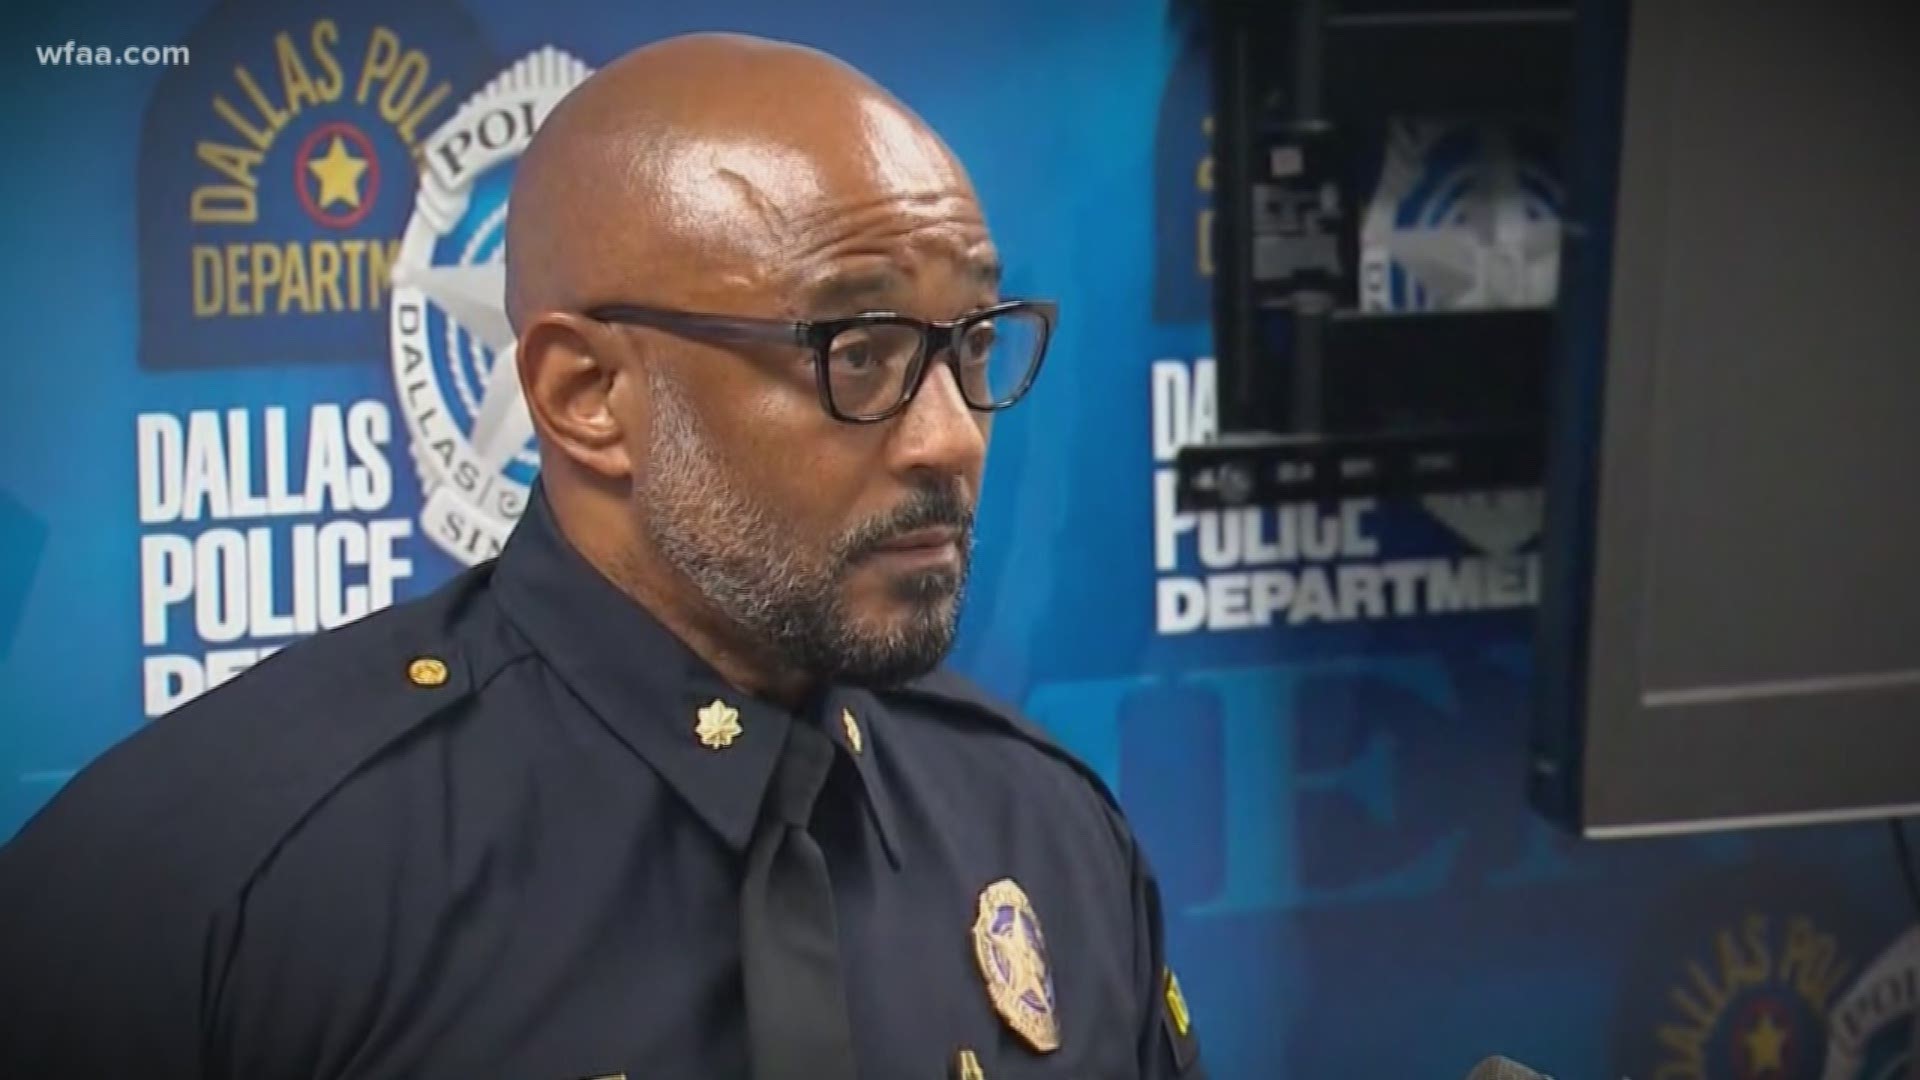 WFAA has learned that Maj. Vince Weddington is under criminal investigation and there’s an internal affairs complaint after he allegedly asked a detective to destroy documents in a high-profile murder case.